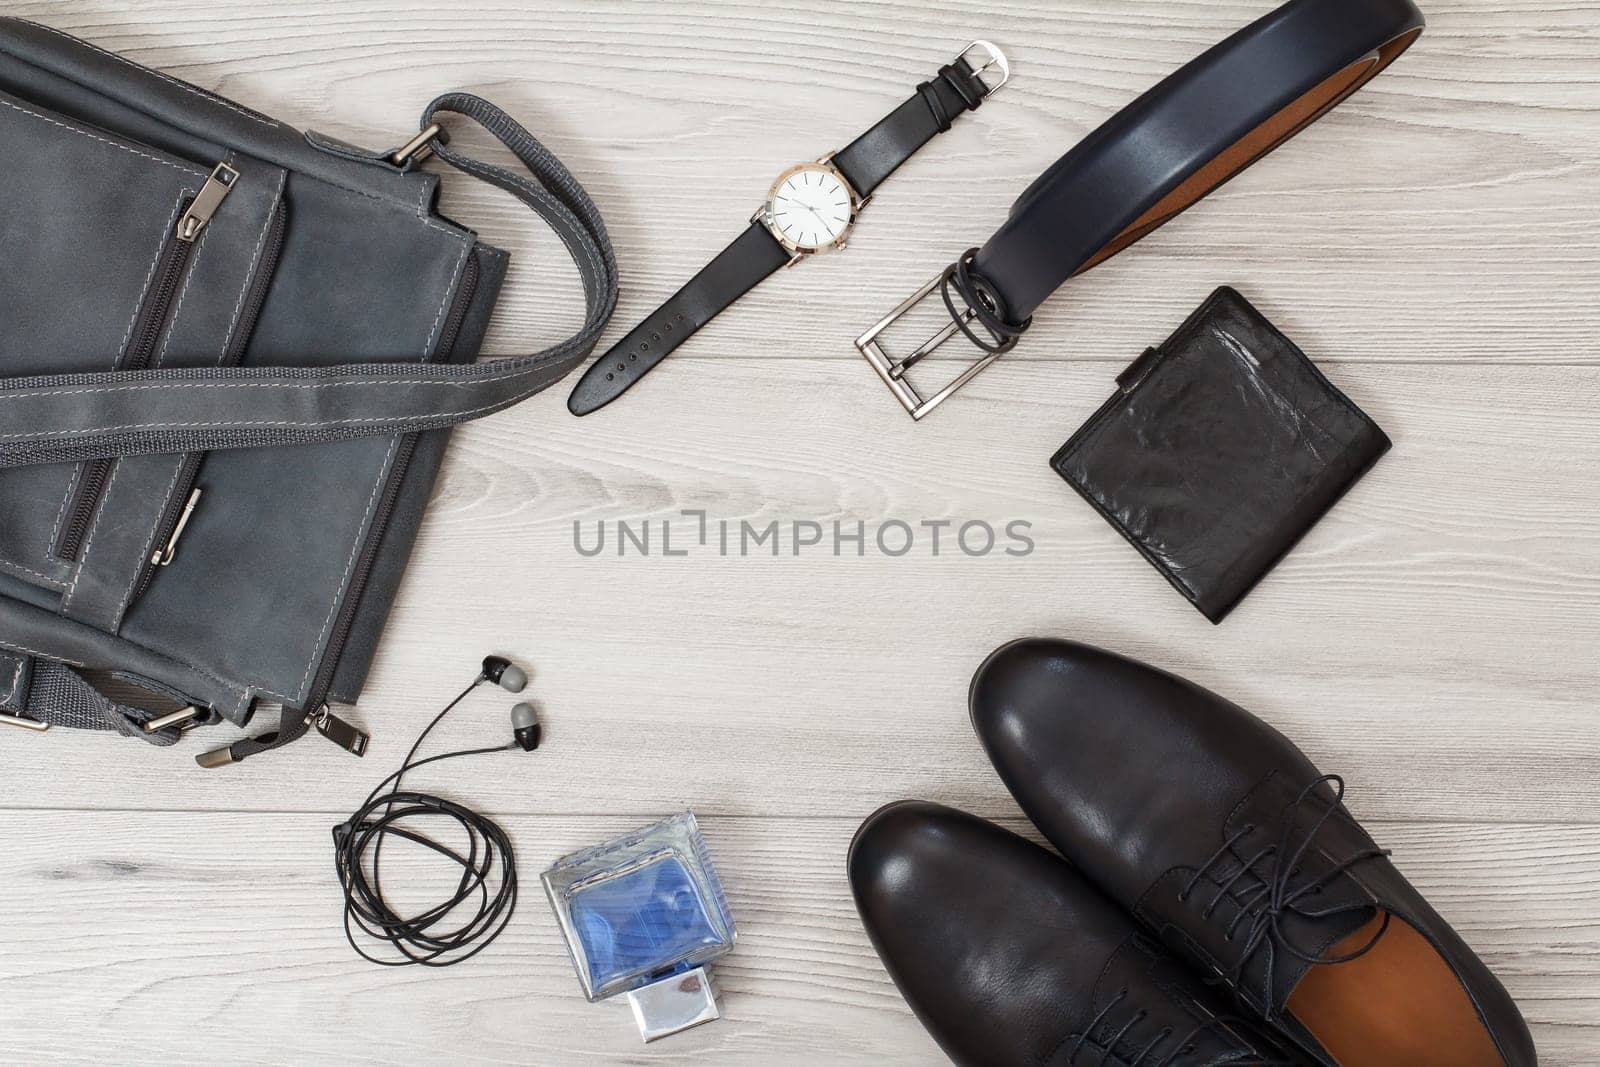 Pair of black leather men's shoes, leather shoulder bag for men, men's cologne, headphones, watch, belt and purse on gray wooden background. Men's accessories. Top view.